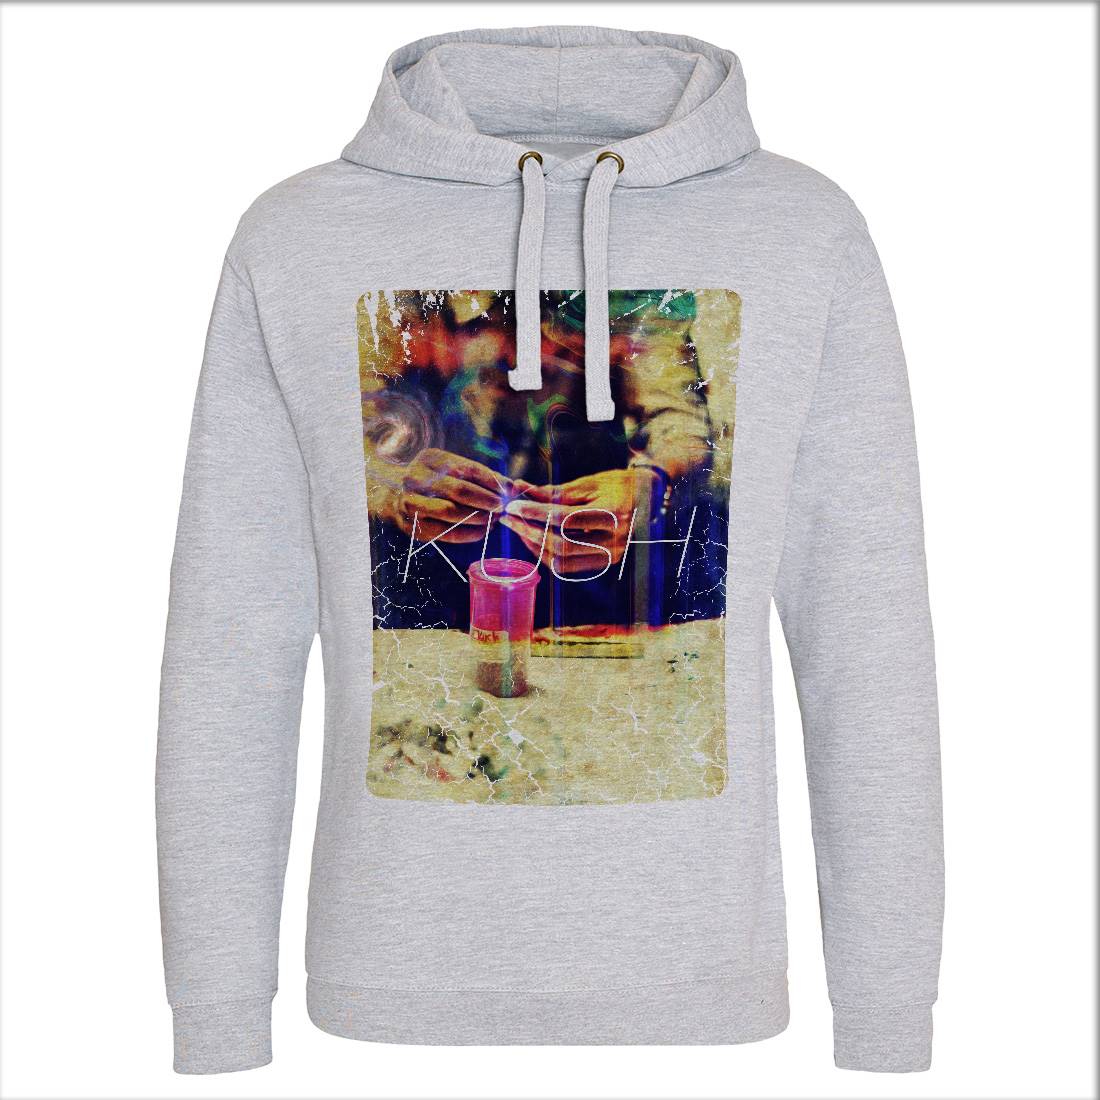 Kush Trippin Mens Hoodie Without Pocket Drugs A857